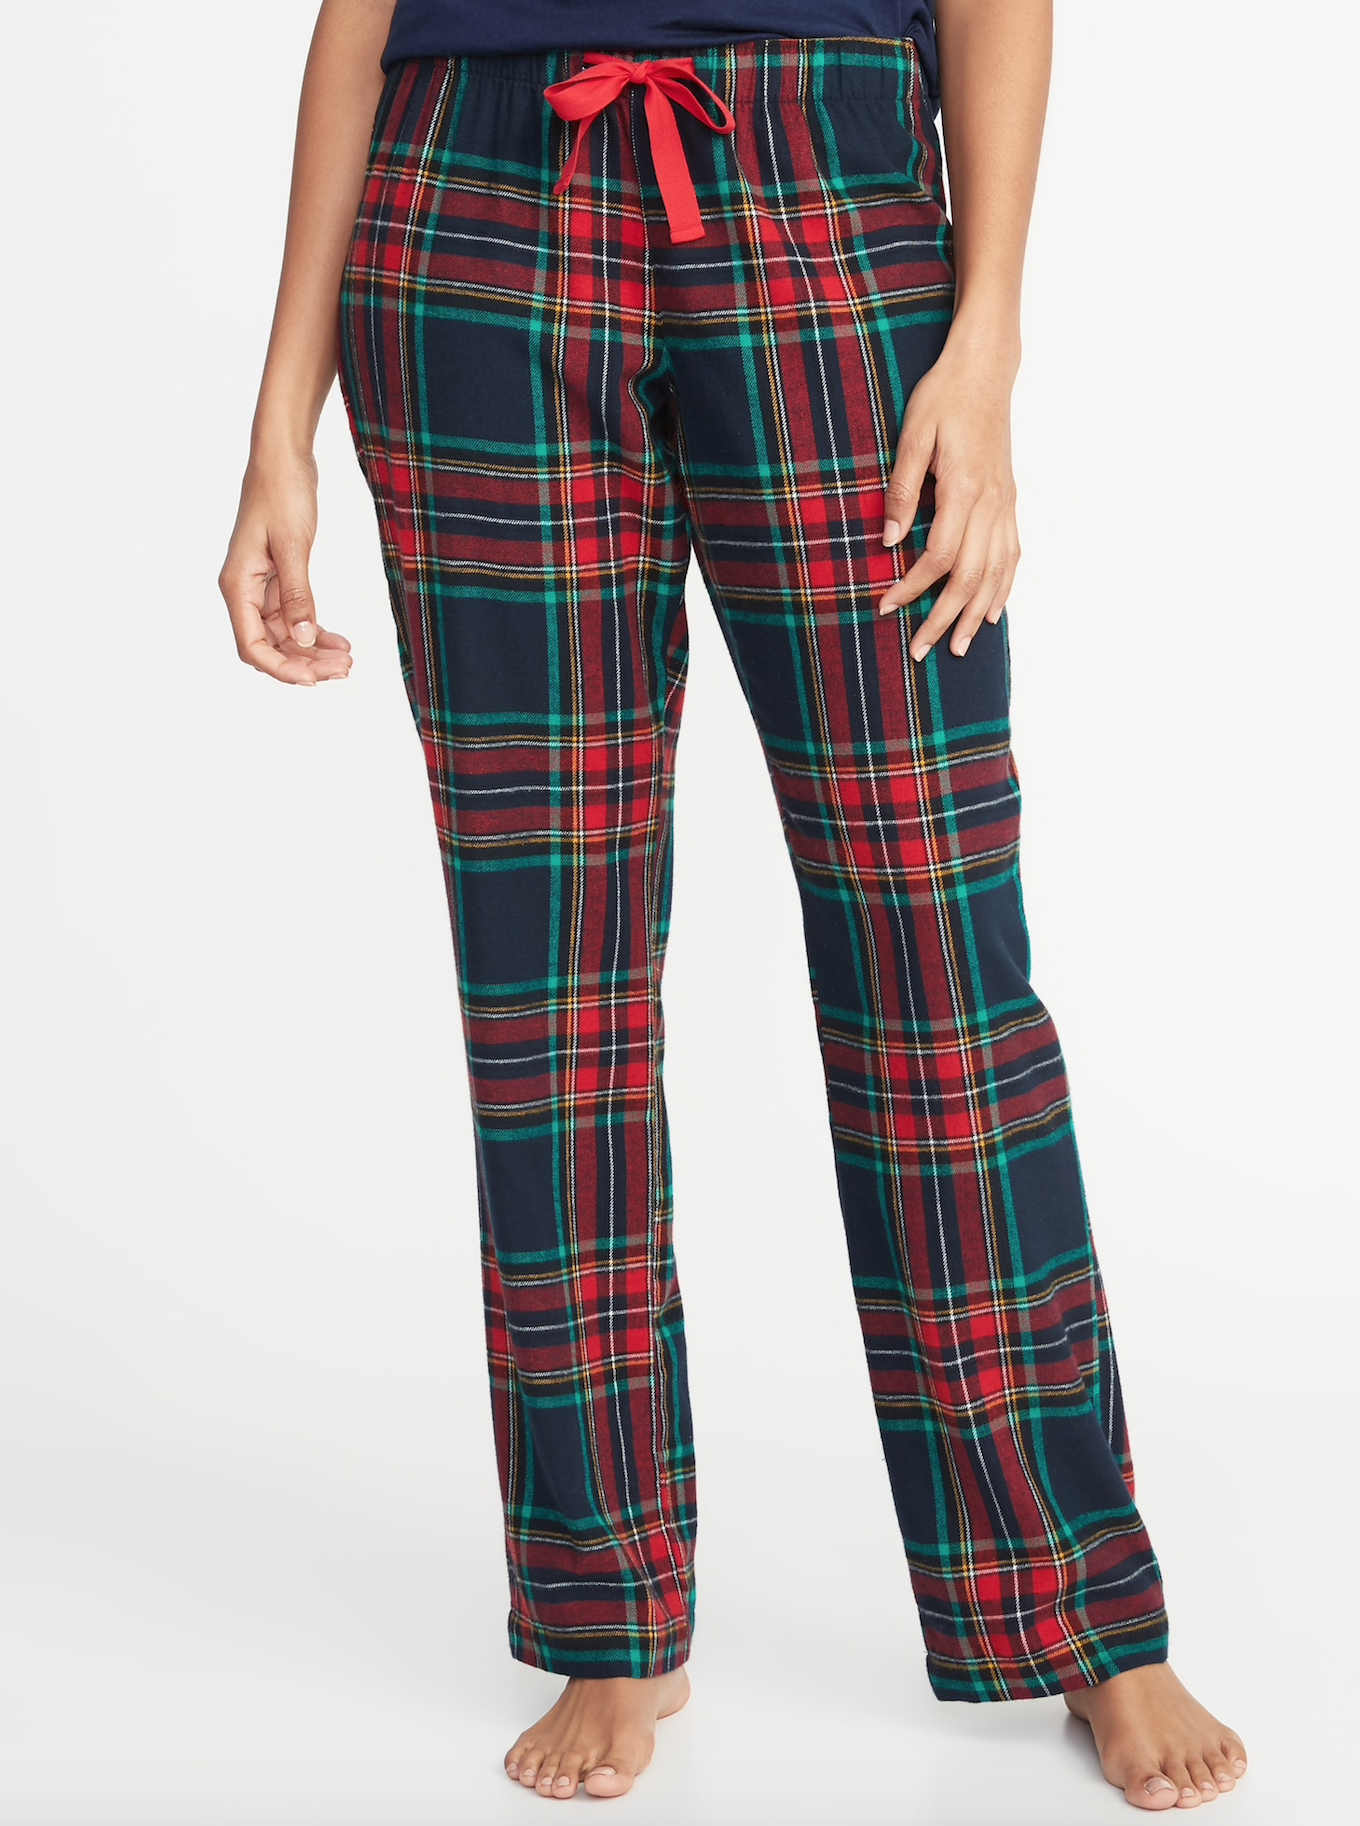 Holiday Pajamas for the Entire Family - Katie Considers